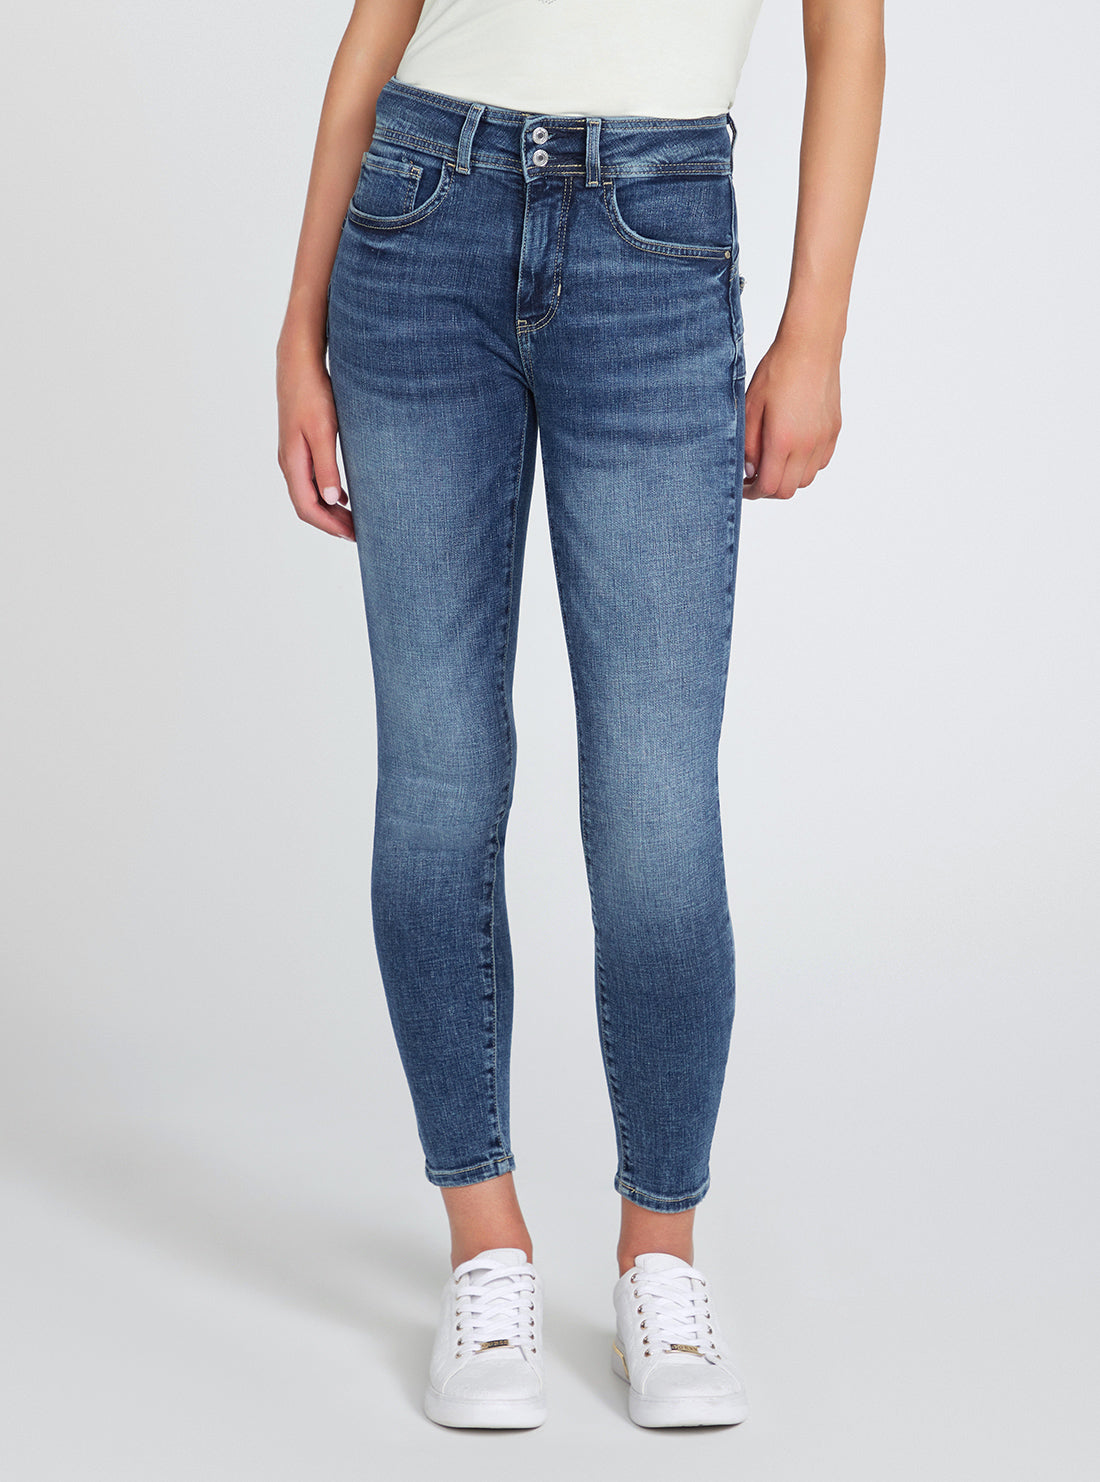 Mid-Rise Shape Up Denim Jeans in Biosphere Wash